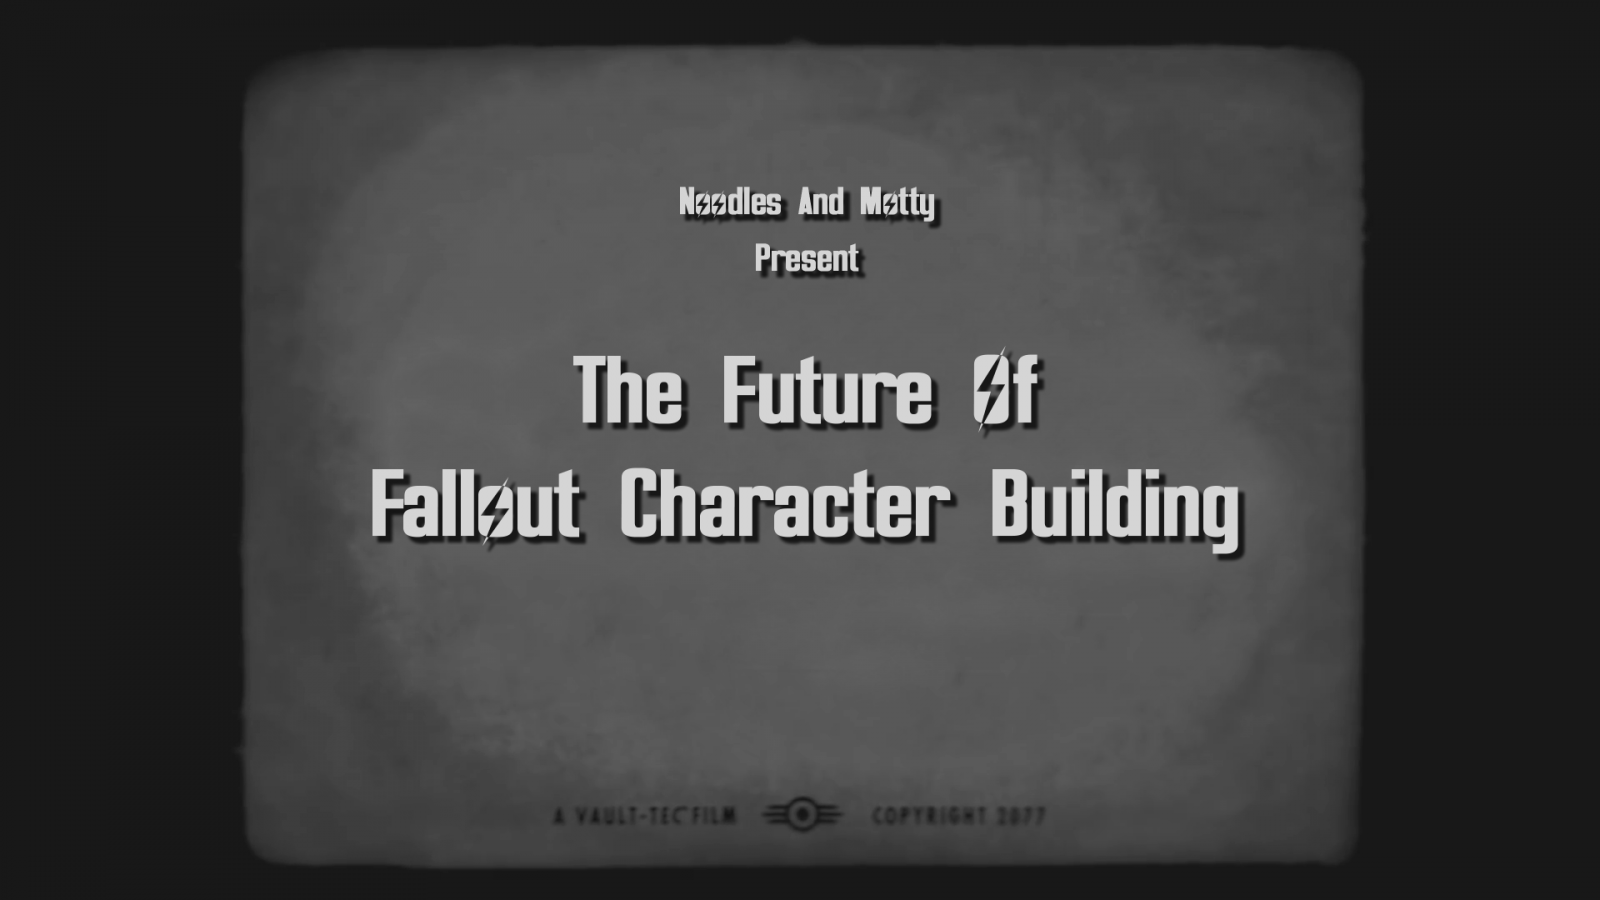 The Future of Fallout Character Building